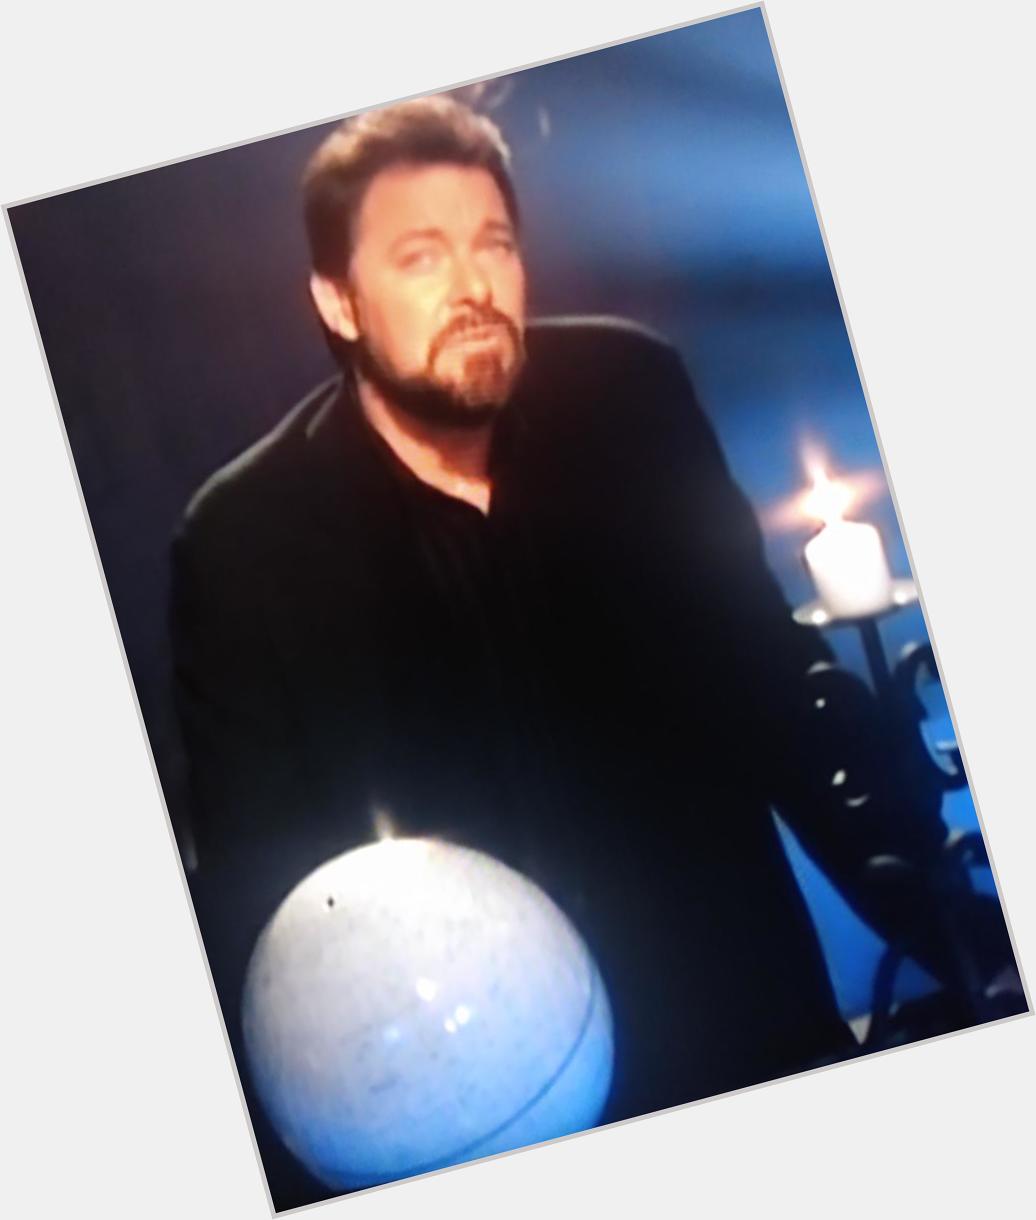  A pic I took a for You Jon.
Happy birthday to:
Jonathan Frakes... A Great Man. 